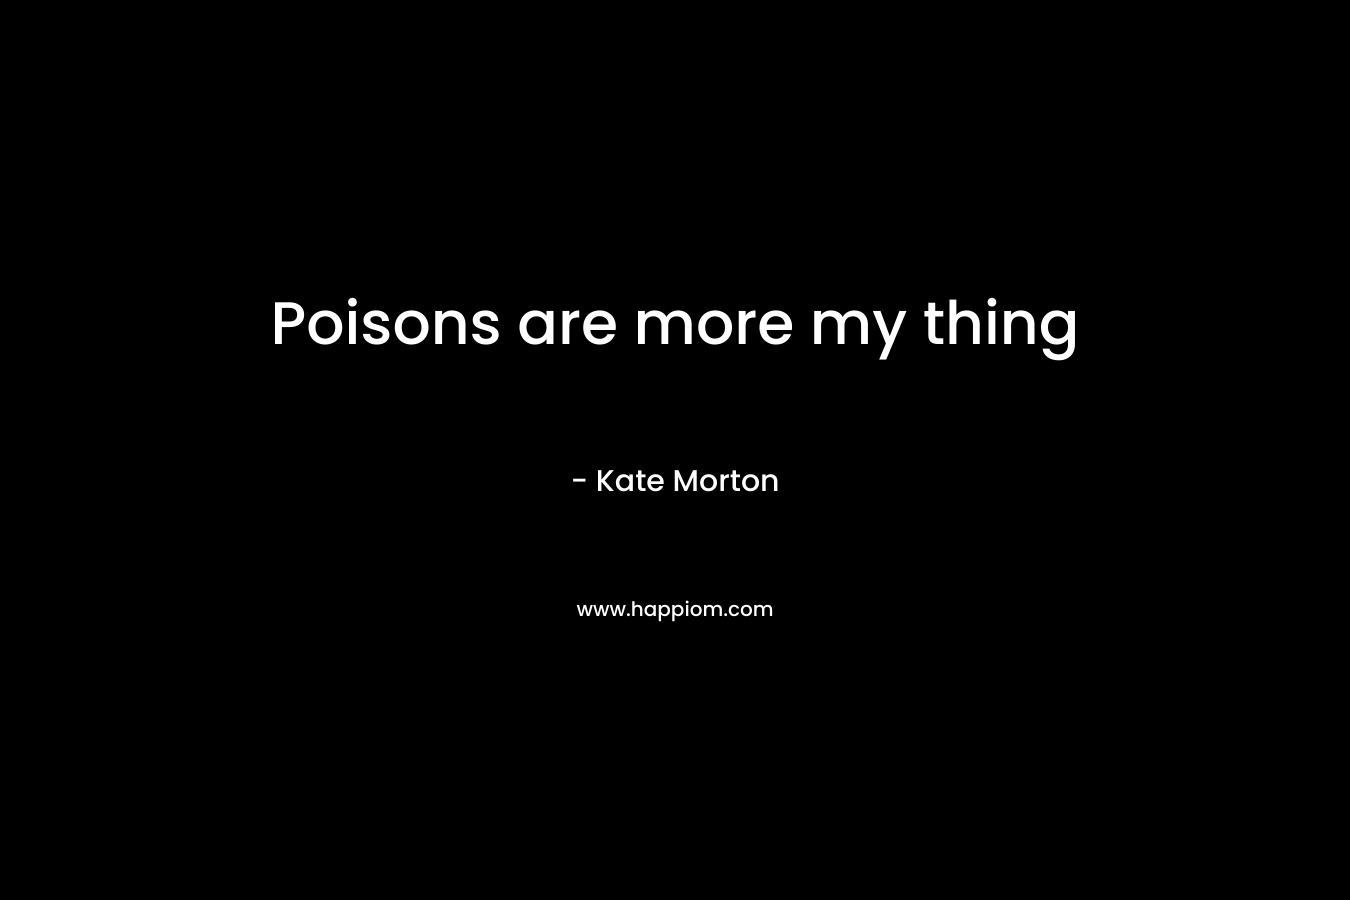 Poisons are more my thing